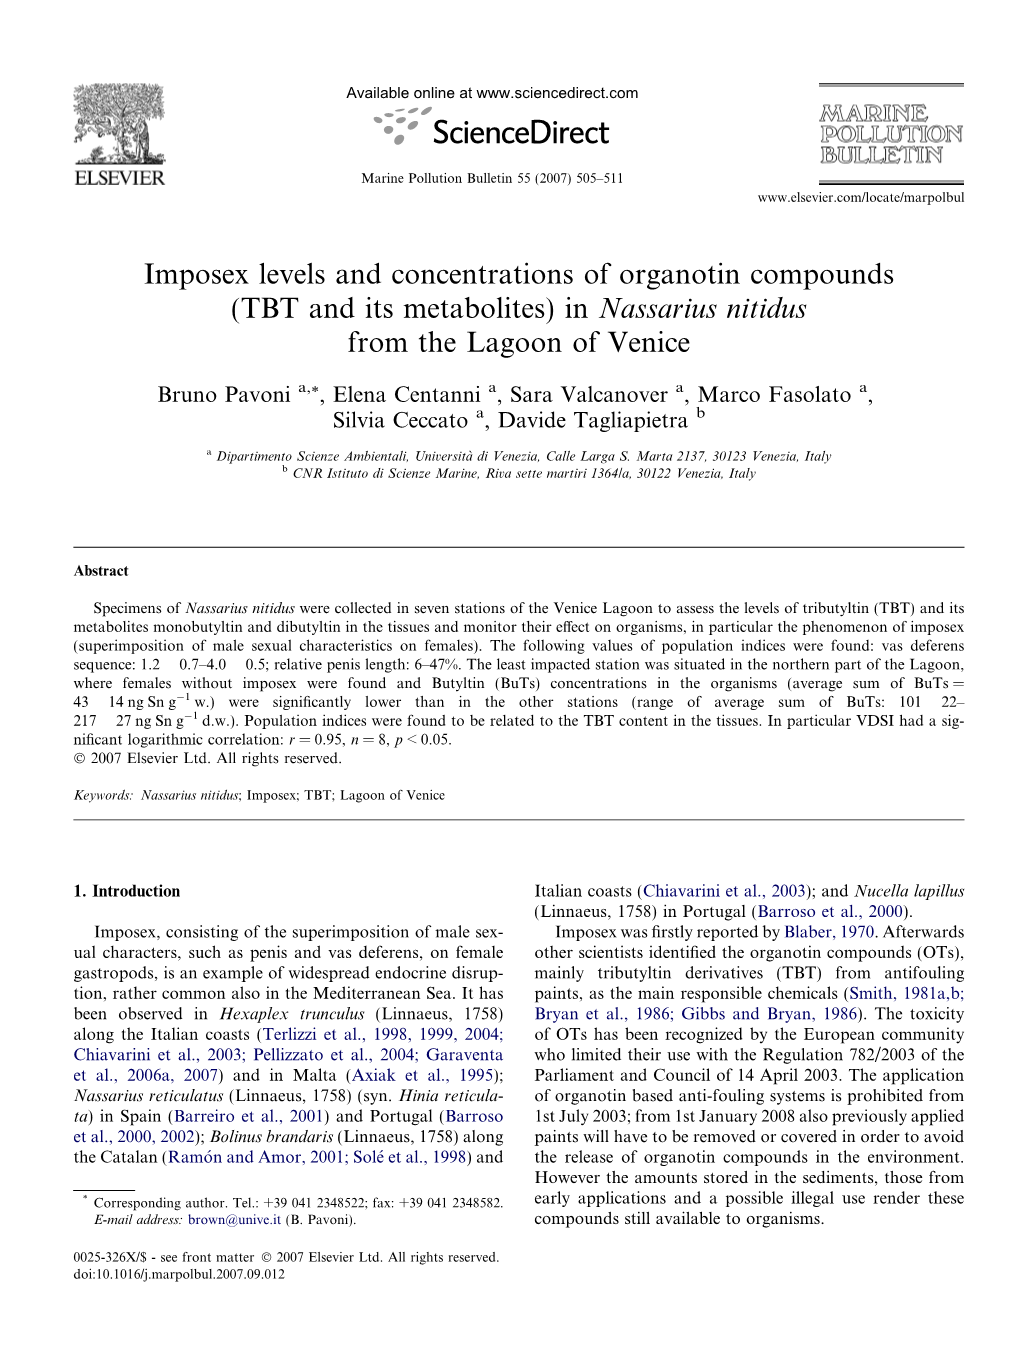 Imposex Levels and Concentrations of Organotin Compounds (TBT and Its Metabolites) in Nassarius Nitidus from the Lagoon of Venice